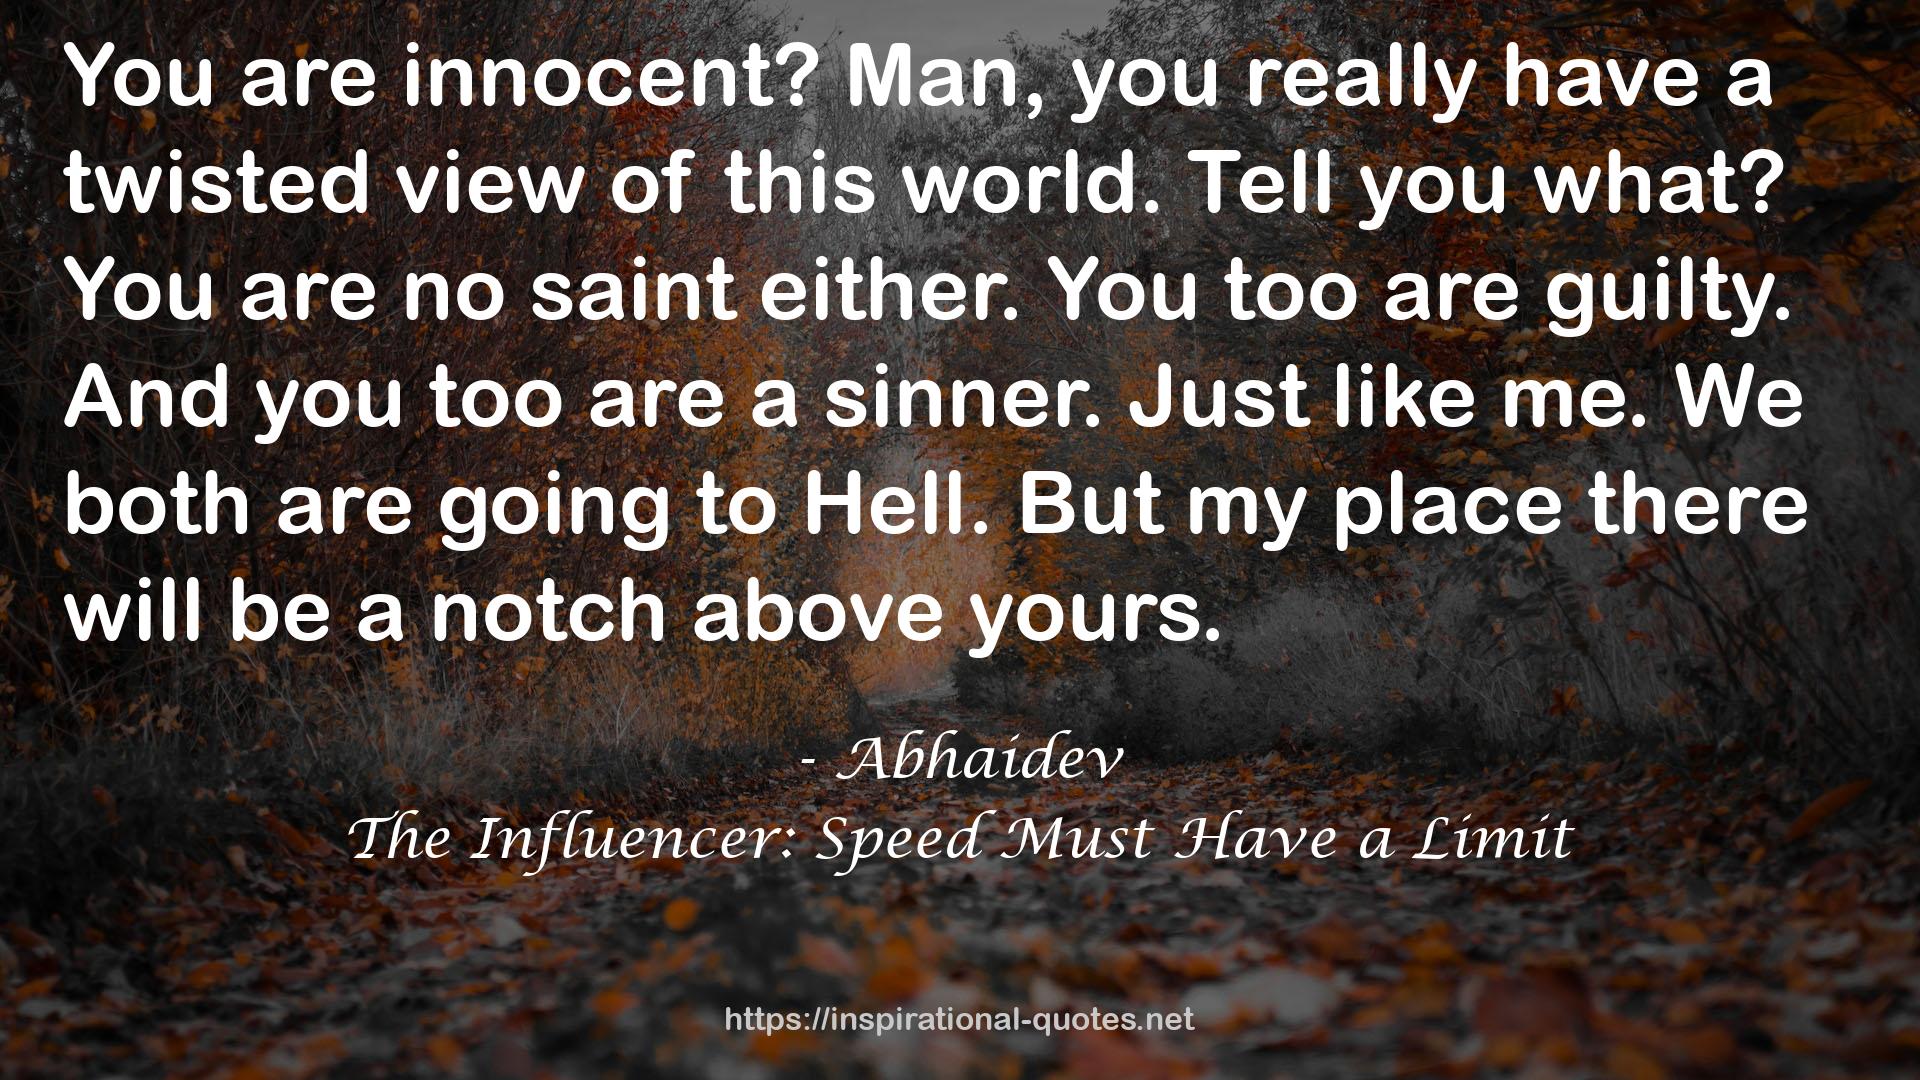 The Influencer: Speed Must Have a Limit QUOTES